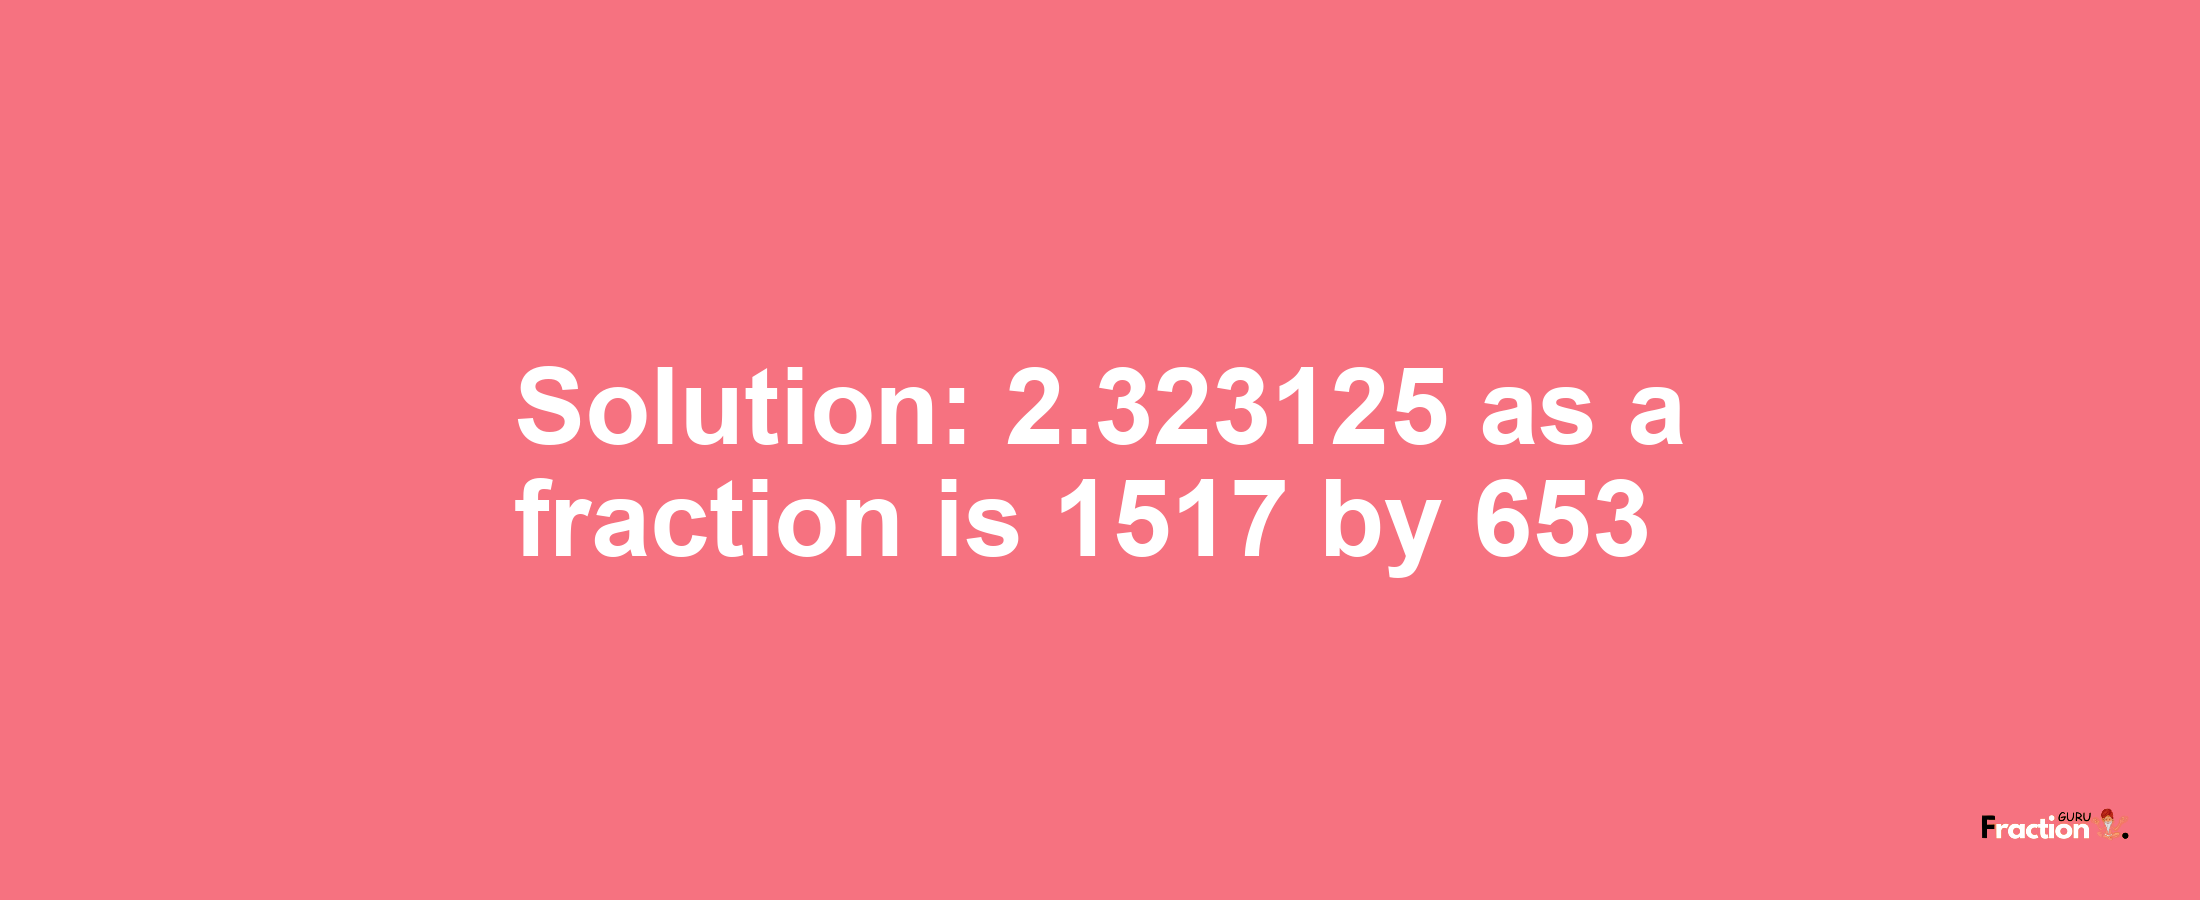 Solution:2.323125 as a fraction is 1517/653